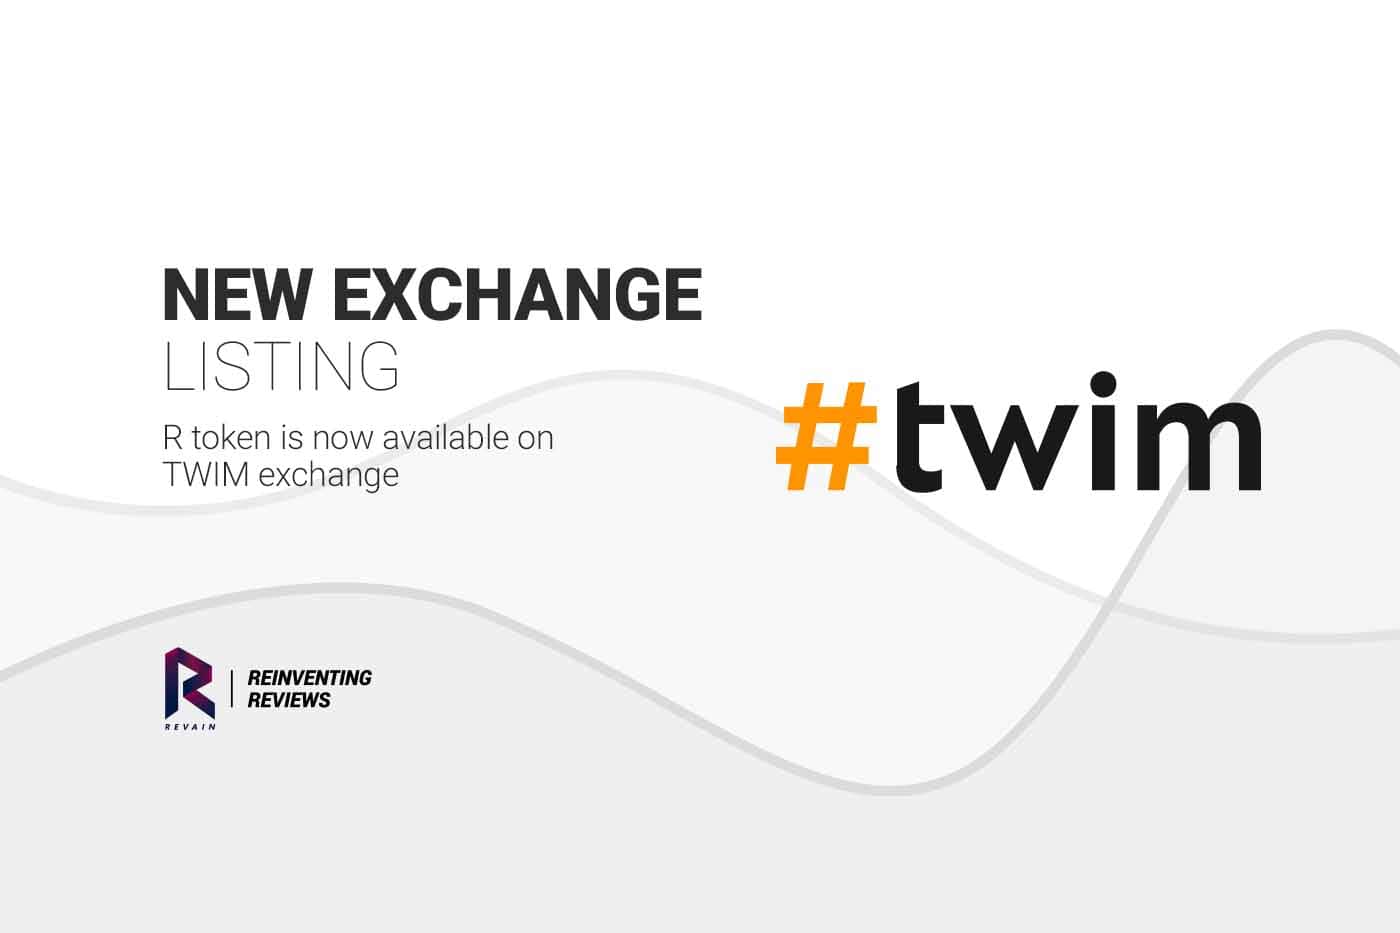 Article Revain is listed on Twim, the new promising exchange from Estonia